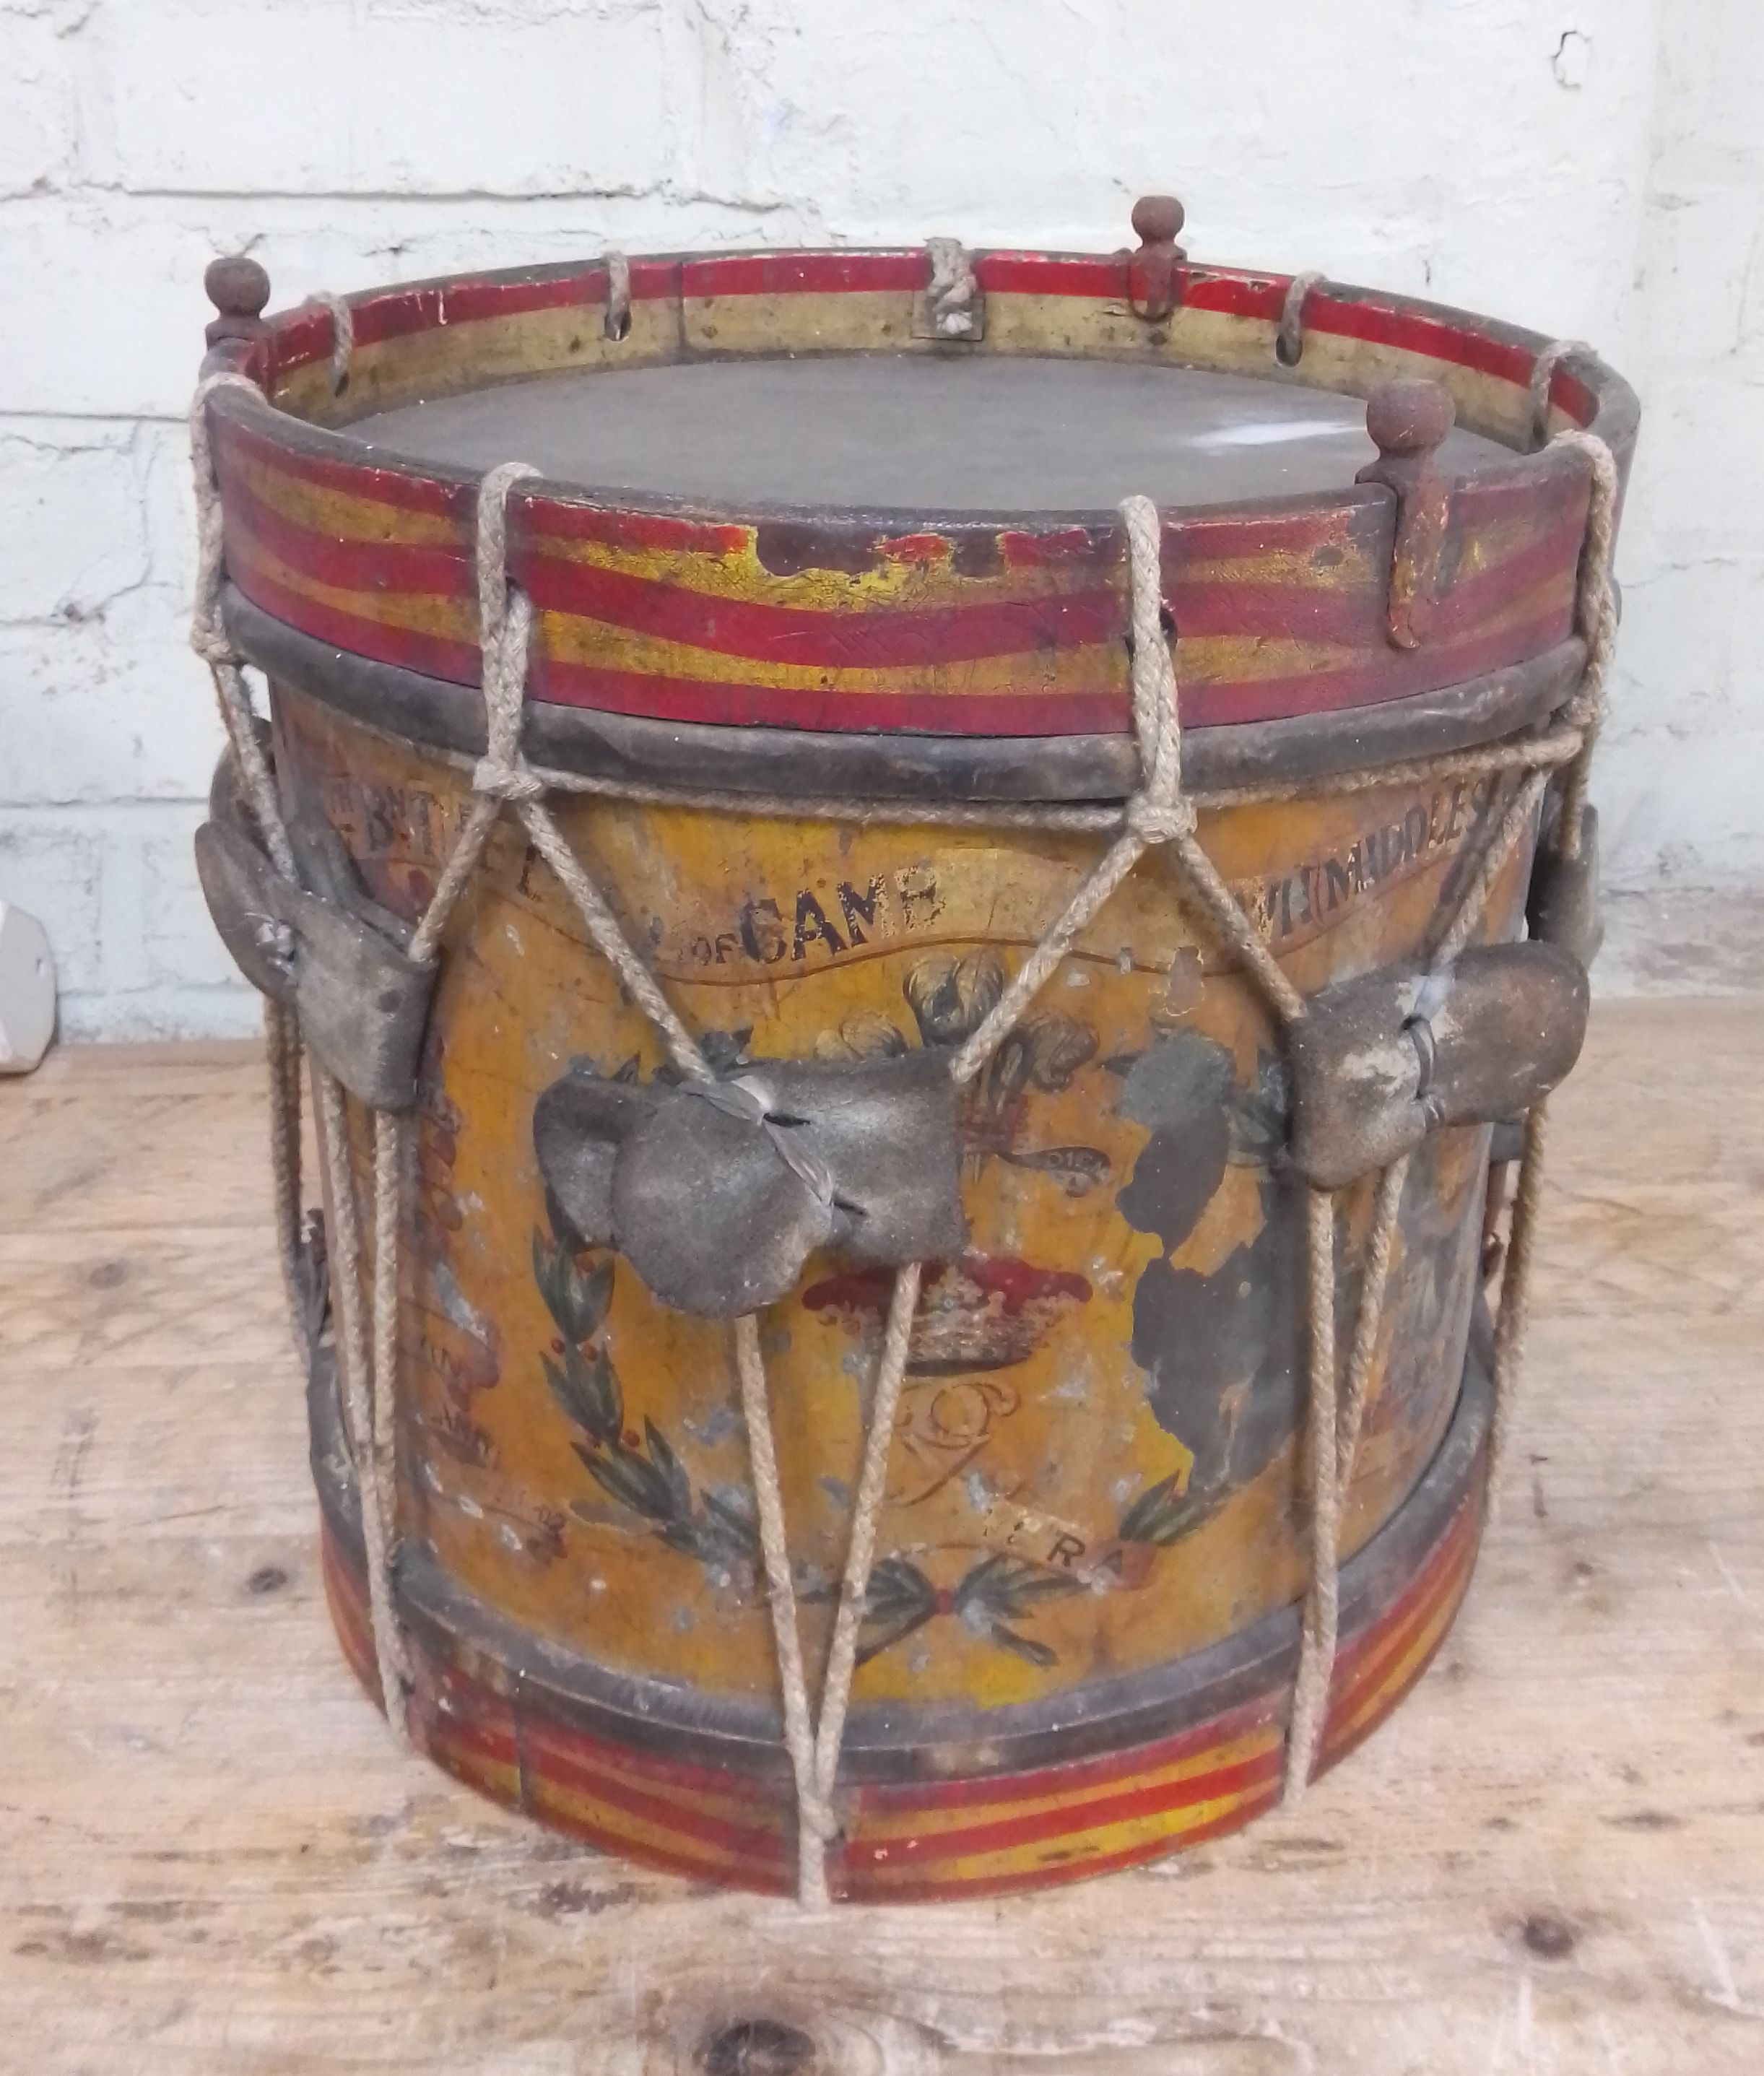 A 12th Battalion Duke of Cambridge's Own (Middlesex Regiment) military side drum.